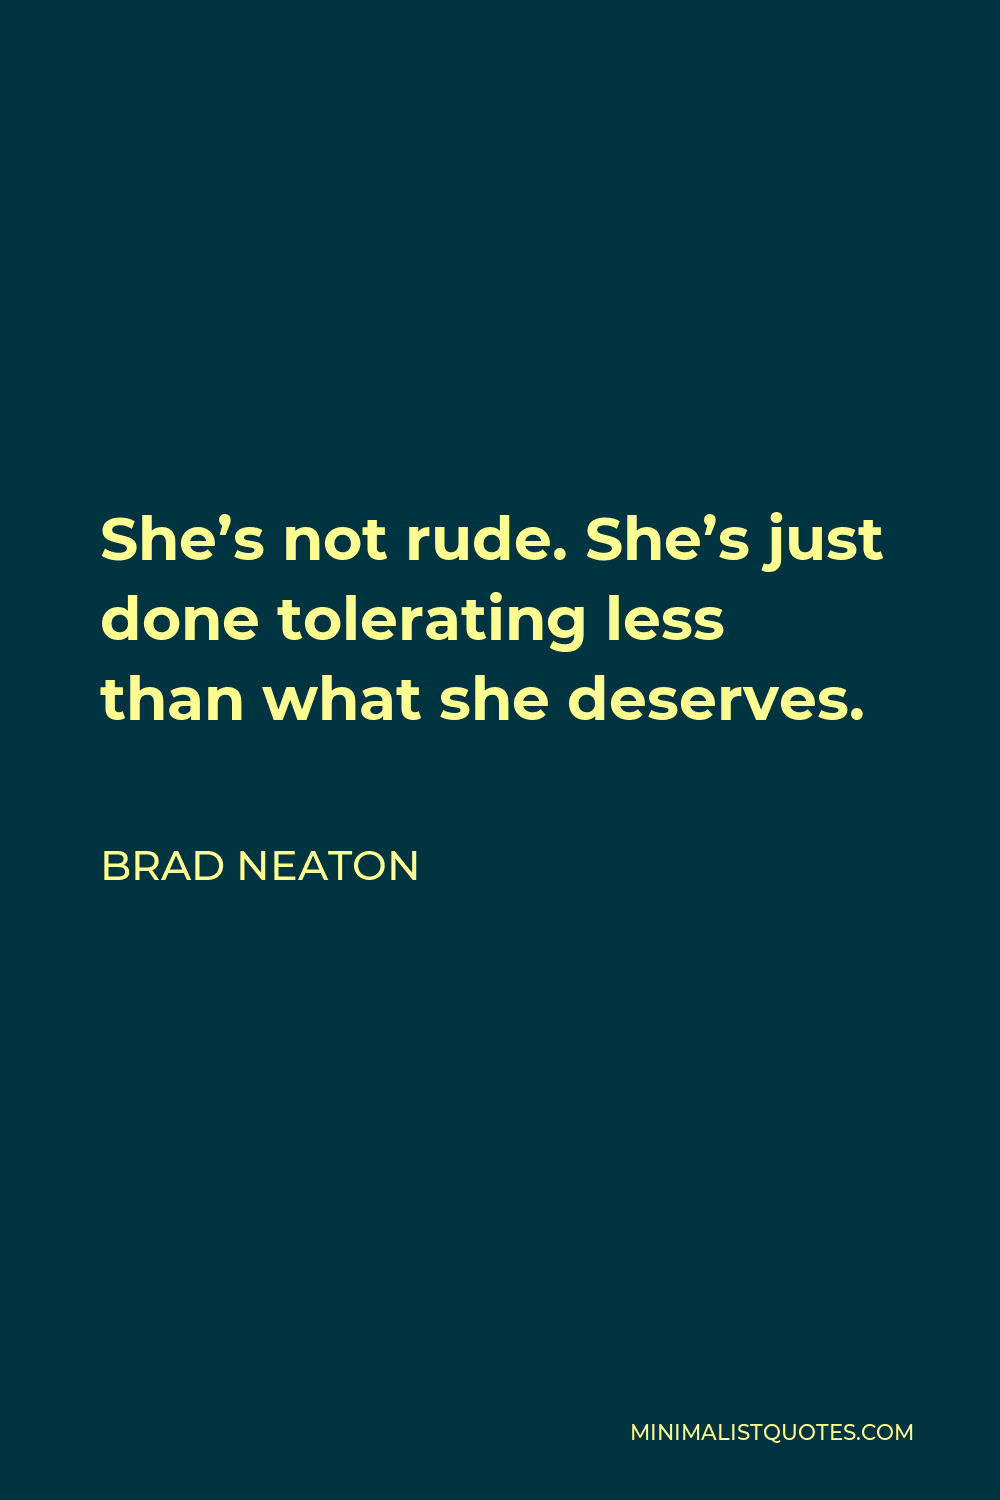 Brad Neaton Quote - She’s not rude. She’s just done tolerating less than what she deserves.